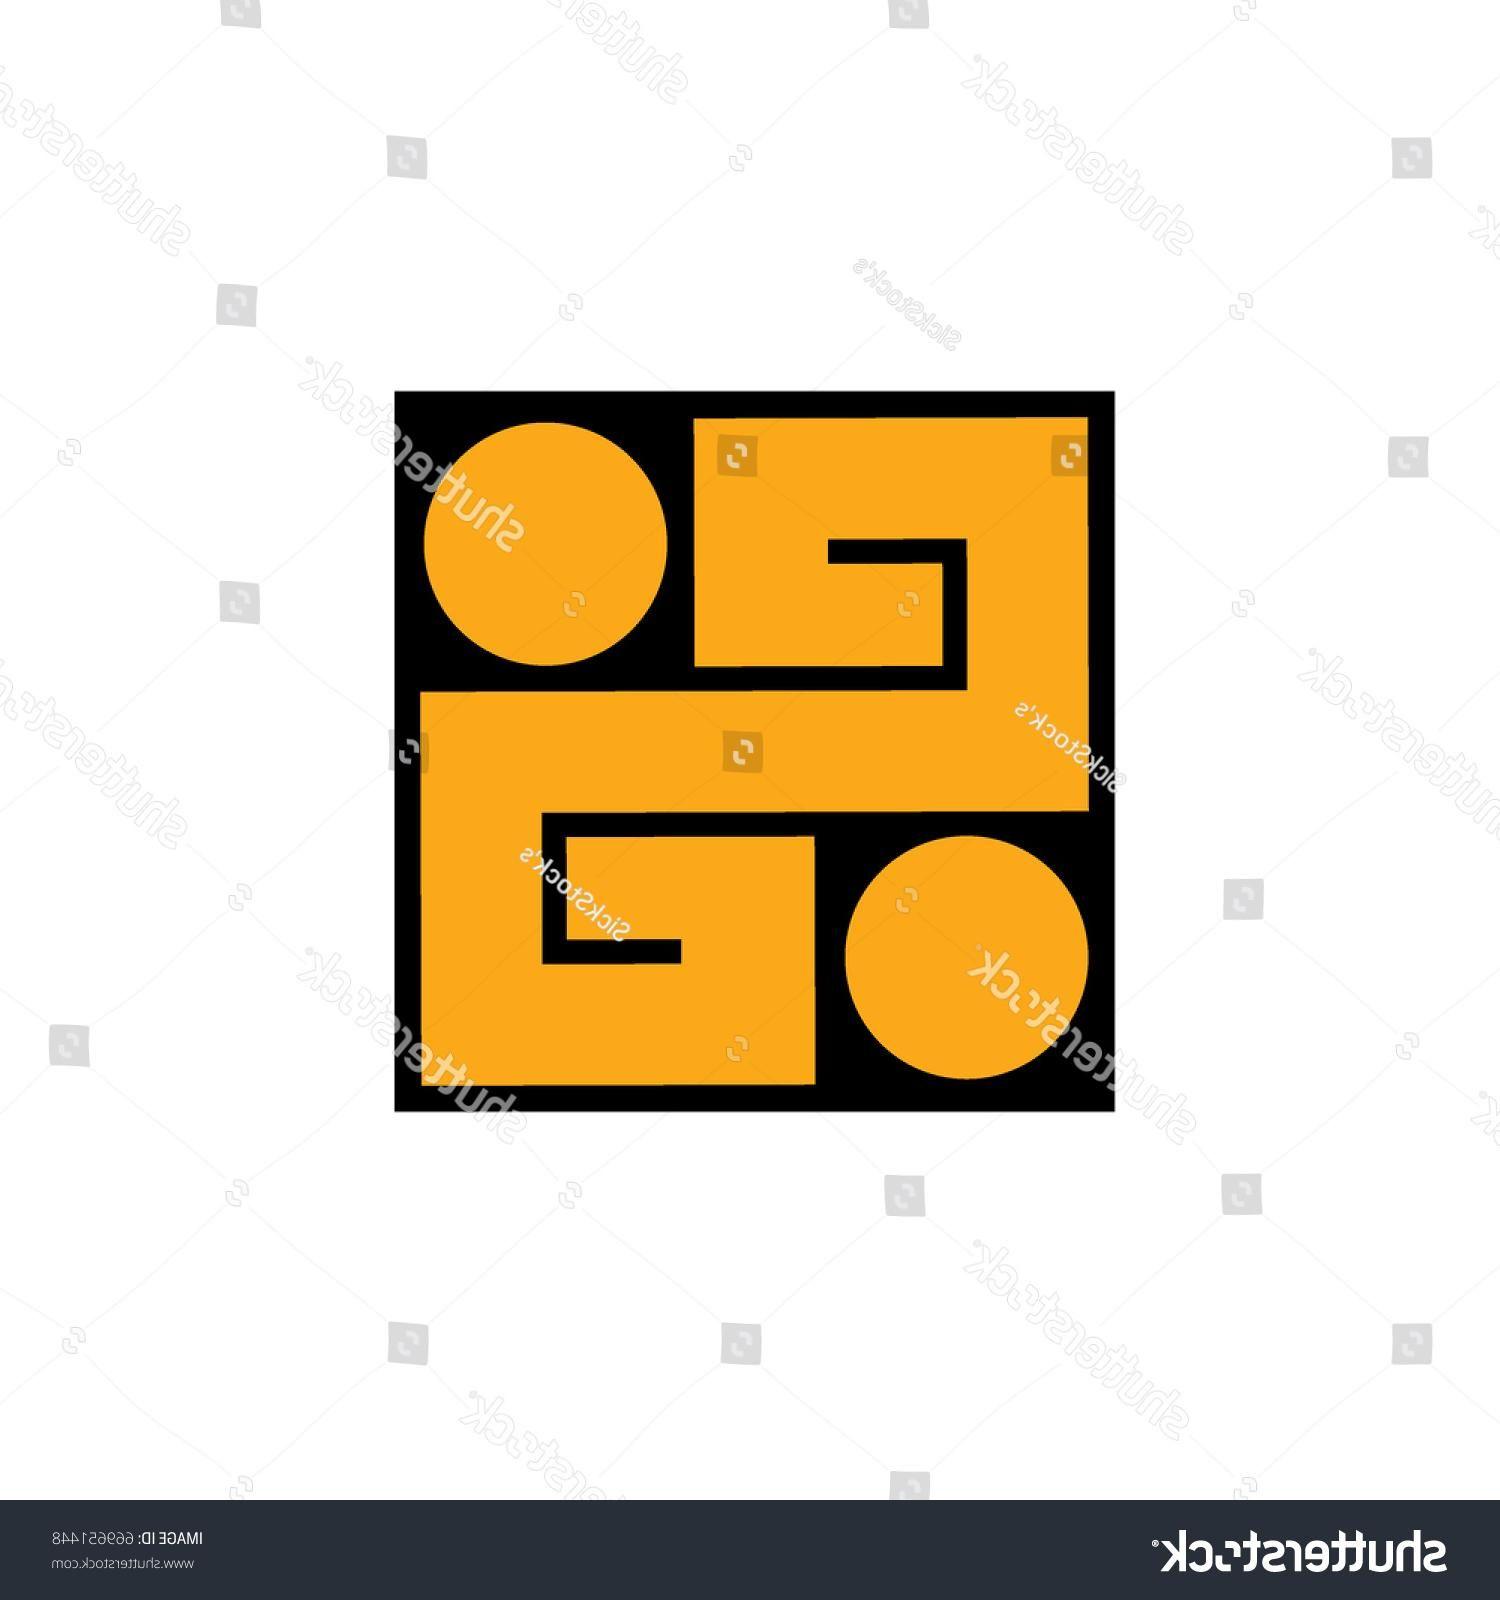 Square Shaped Logo - Top Square Shaped Objects Vector Cdr Free Vector Art, Image